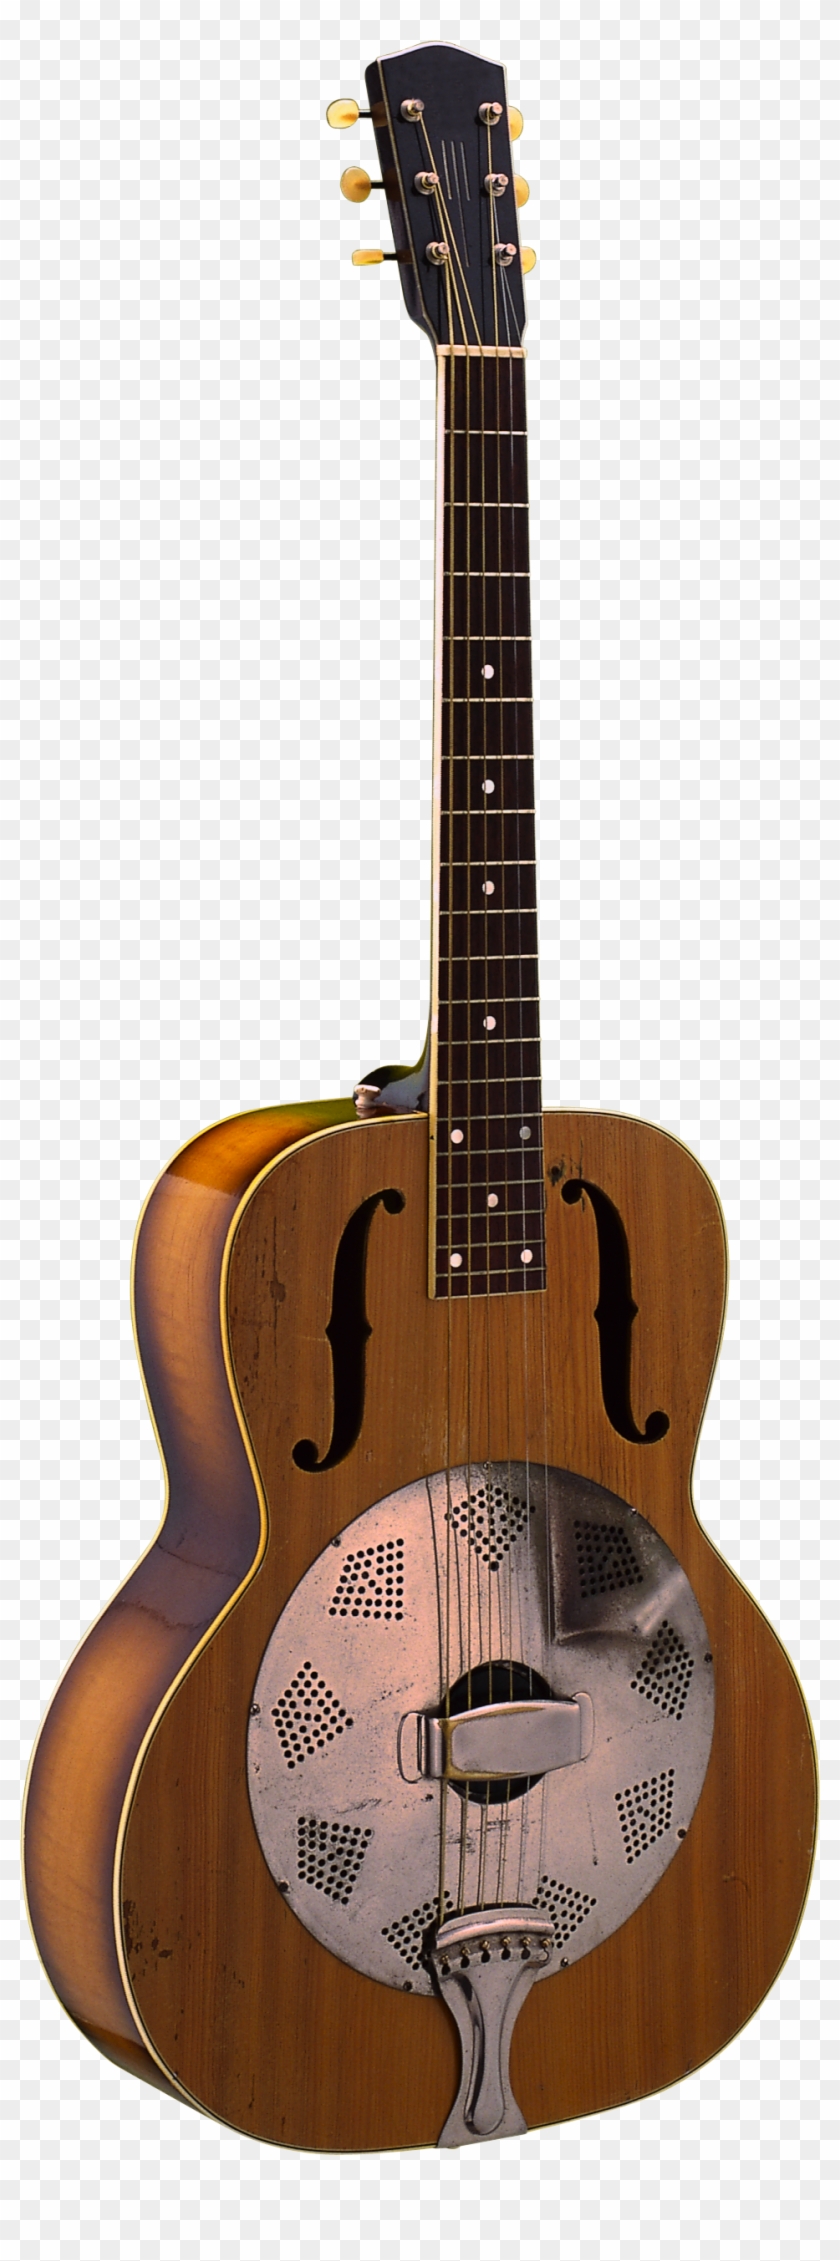 Guitar Png Image Clipart #1874906